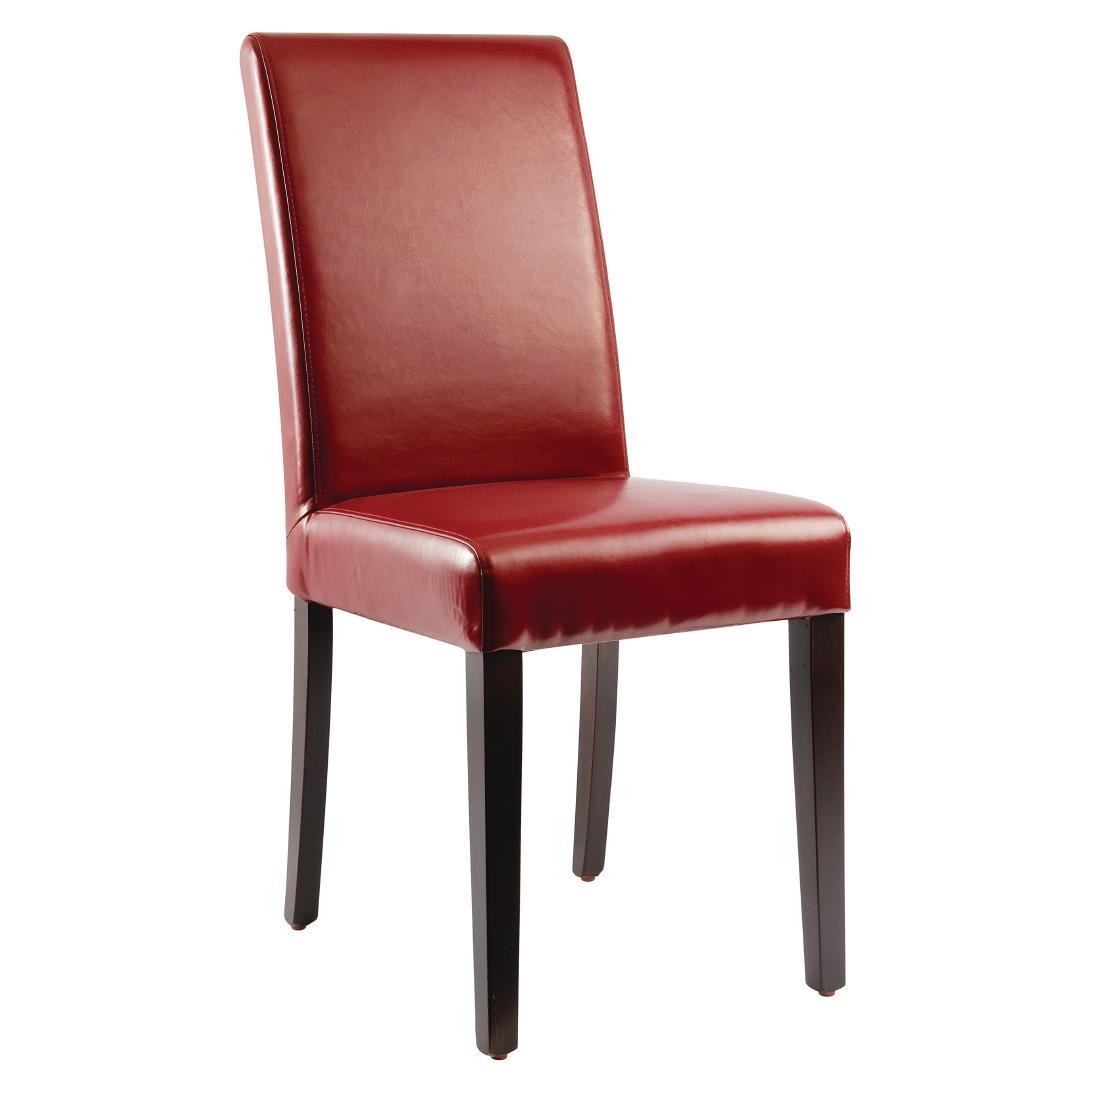 Bolero Faux Leather Dining Chairs Red (Pack of 2) - GH443  - 1